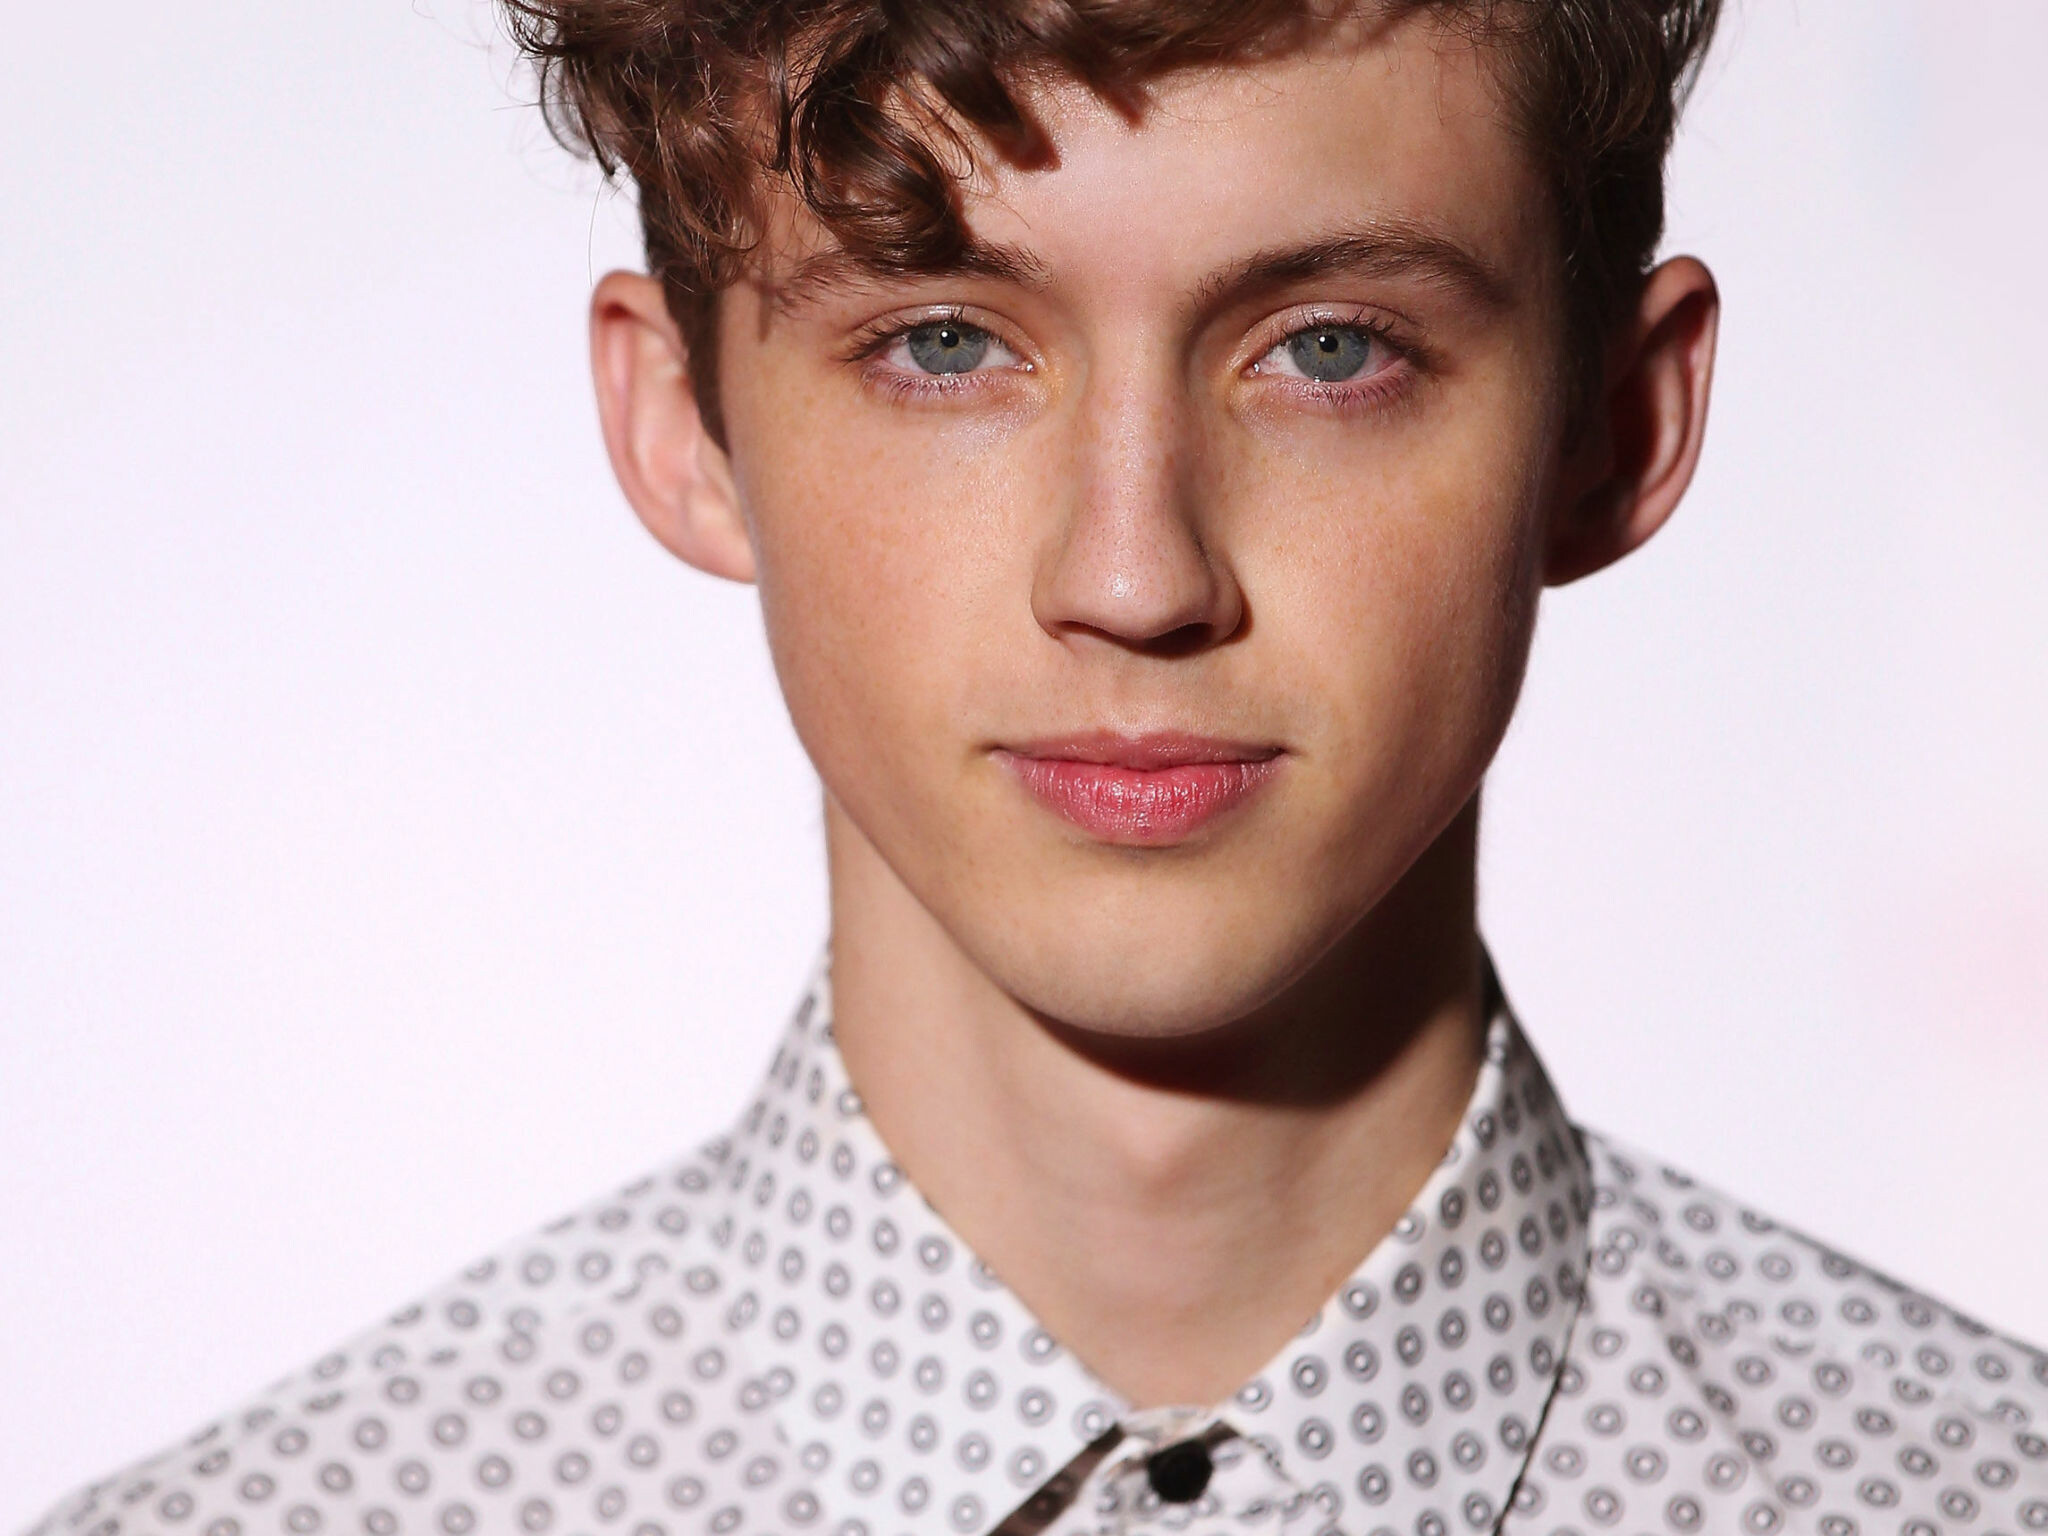 Troye Sivan: "Talk Me Down" was released as a promotional single on 16 October 2015. 2050x1540 HD Wallpaper.